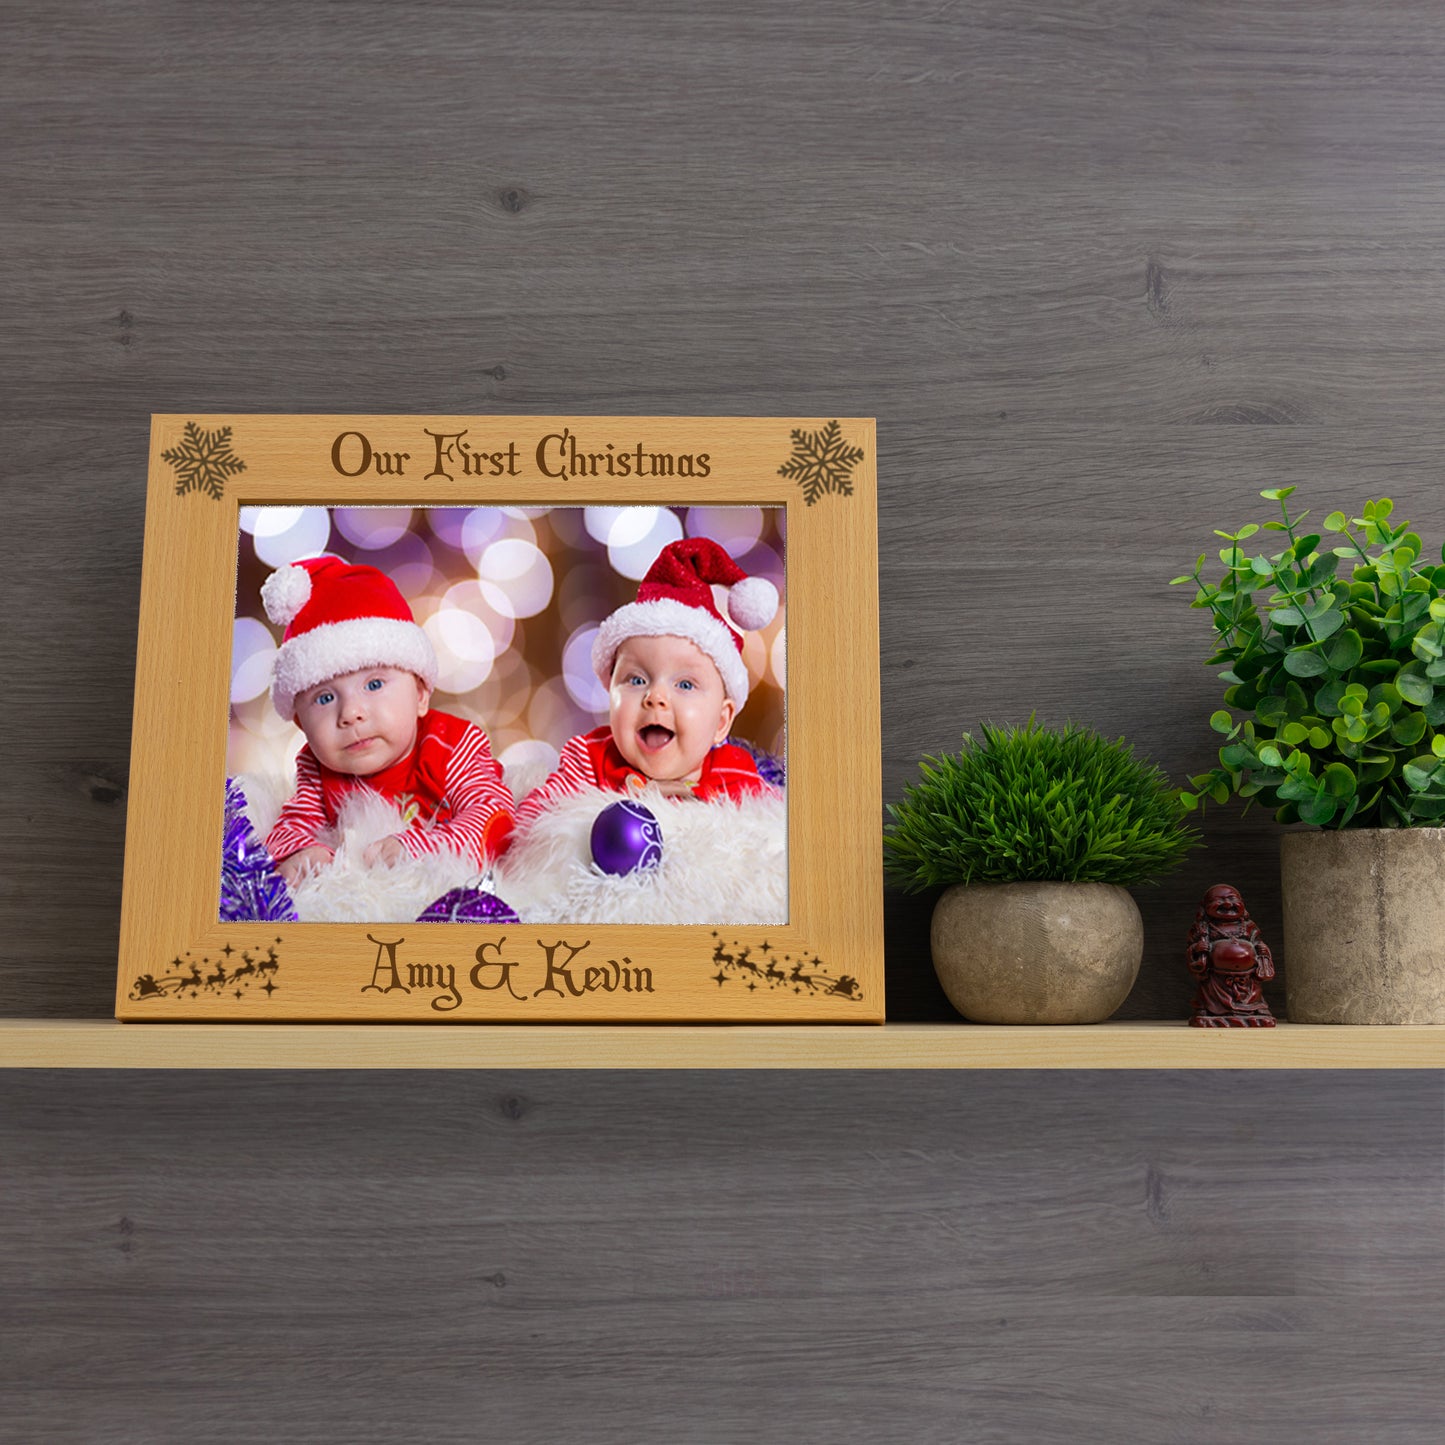 Personalised Engraved Our First Christmas Photo Frame For Twins / Couples  - Always Looking Good -   